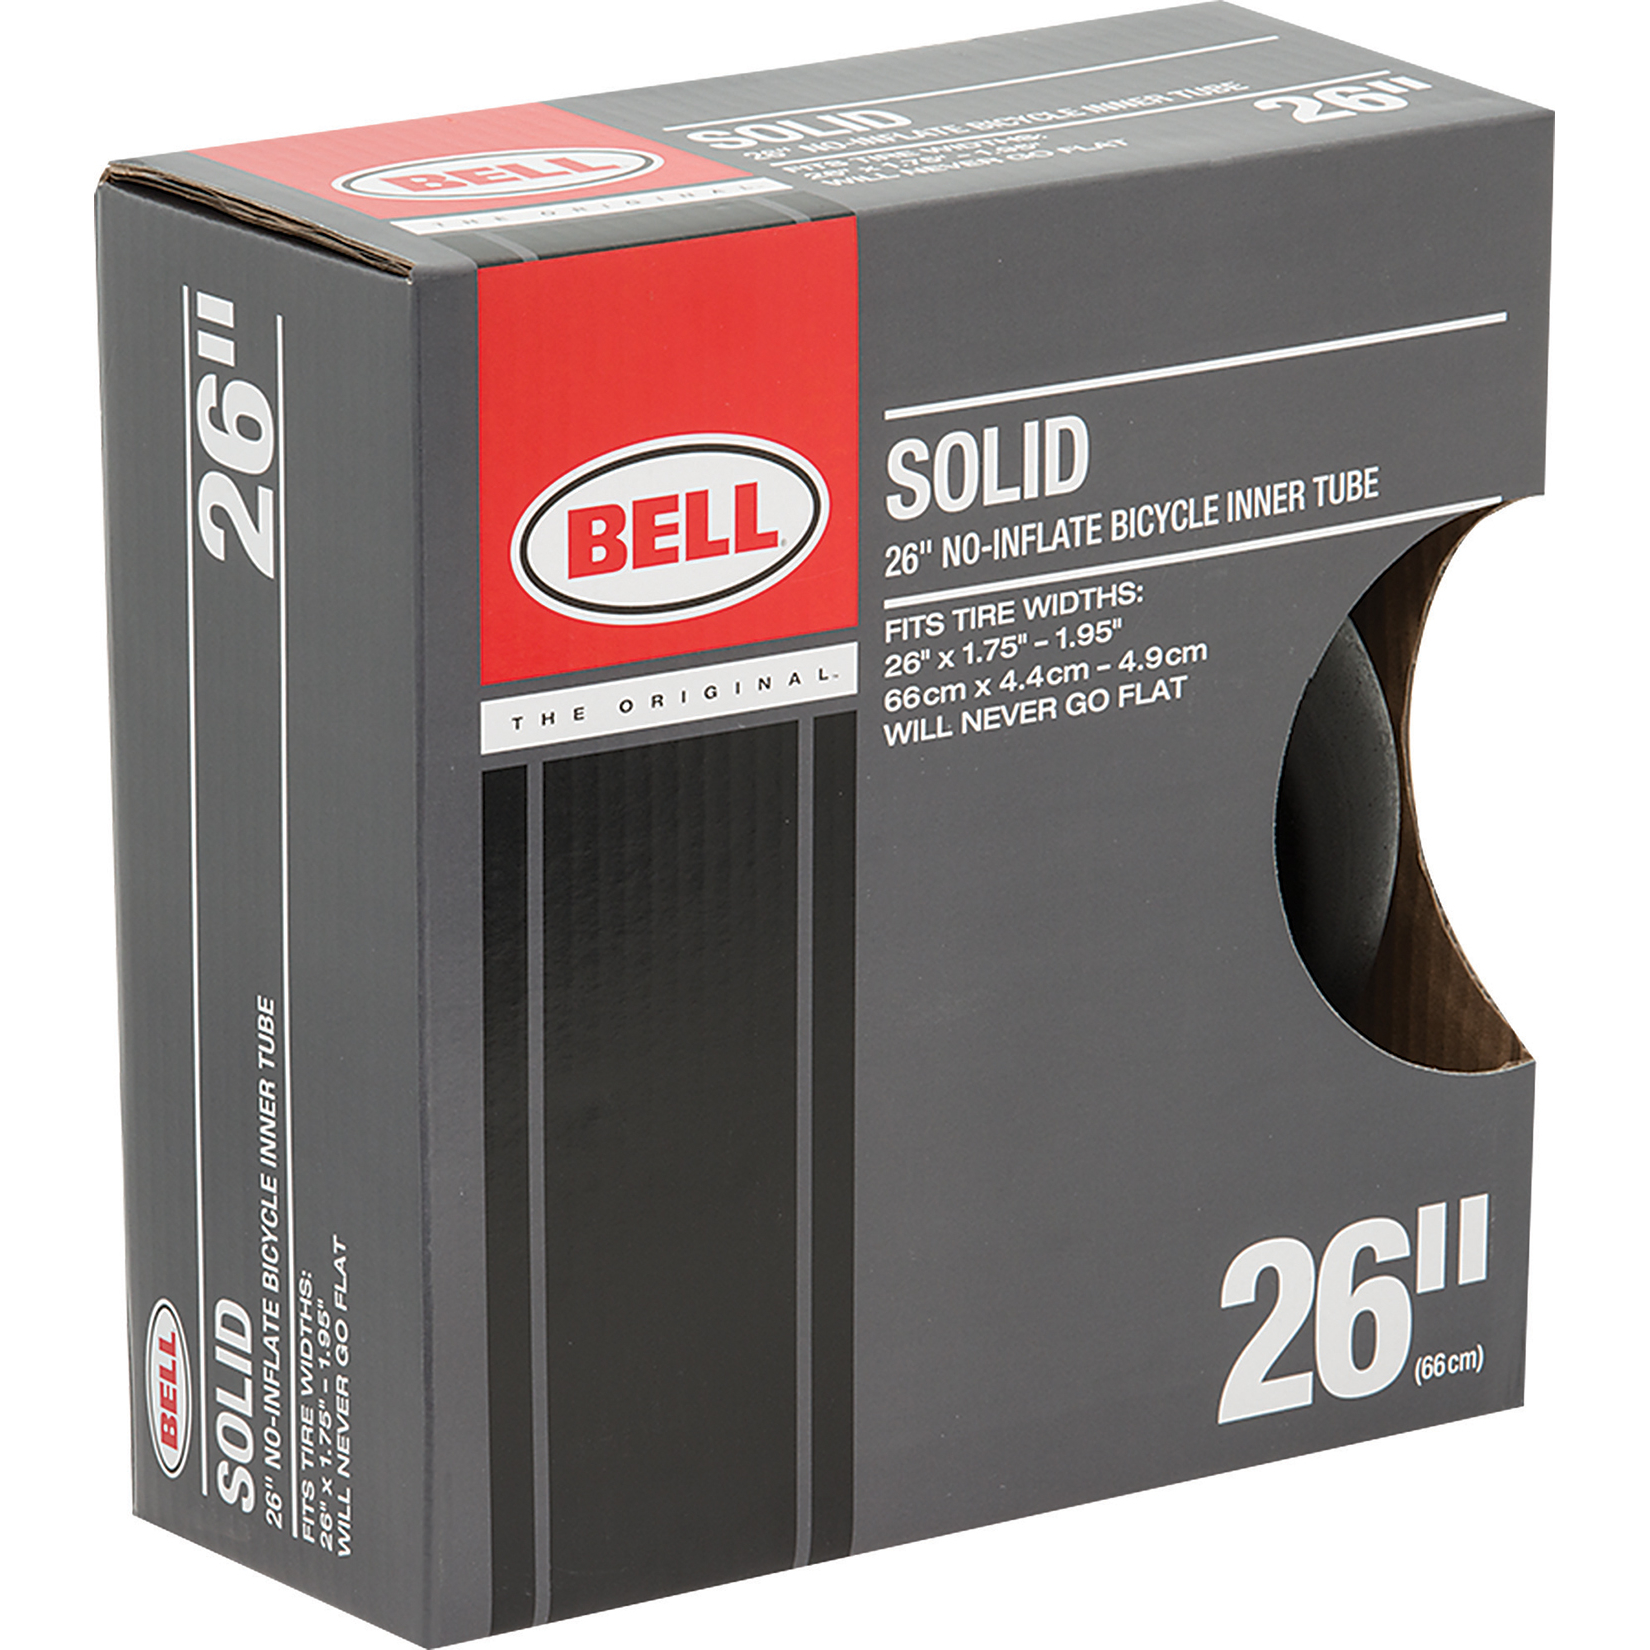 Bell Sports Cycle Products 7015332 26" No-Mor Flats Bicycle Inner Tube - image 1 of 2